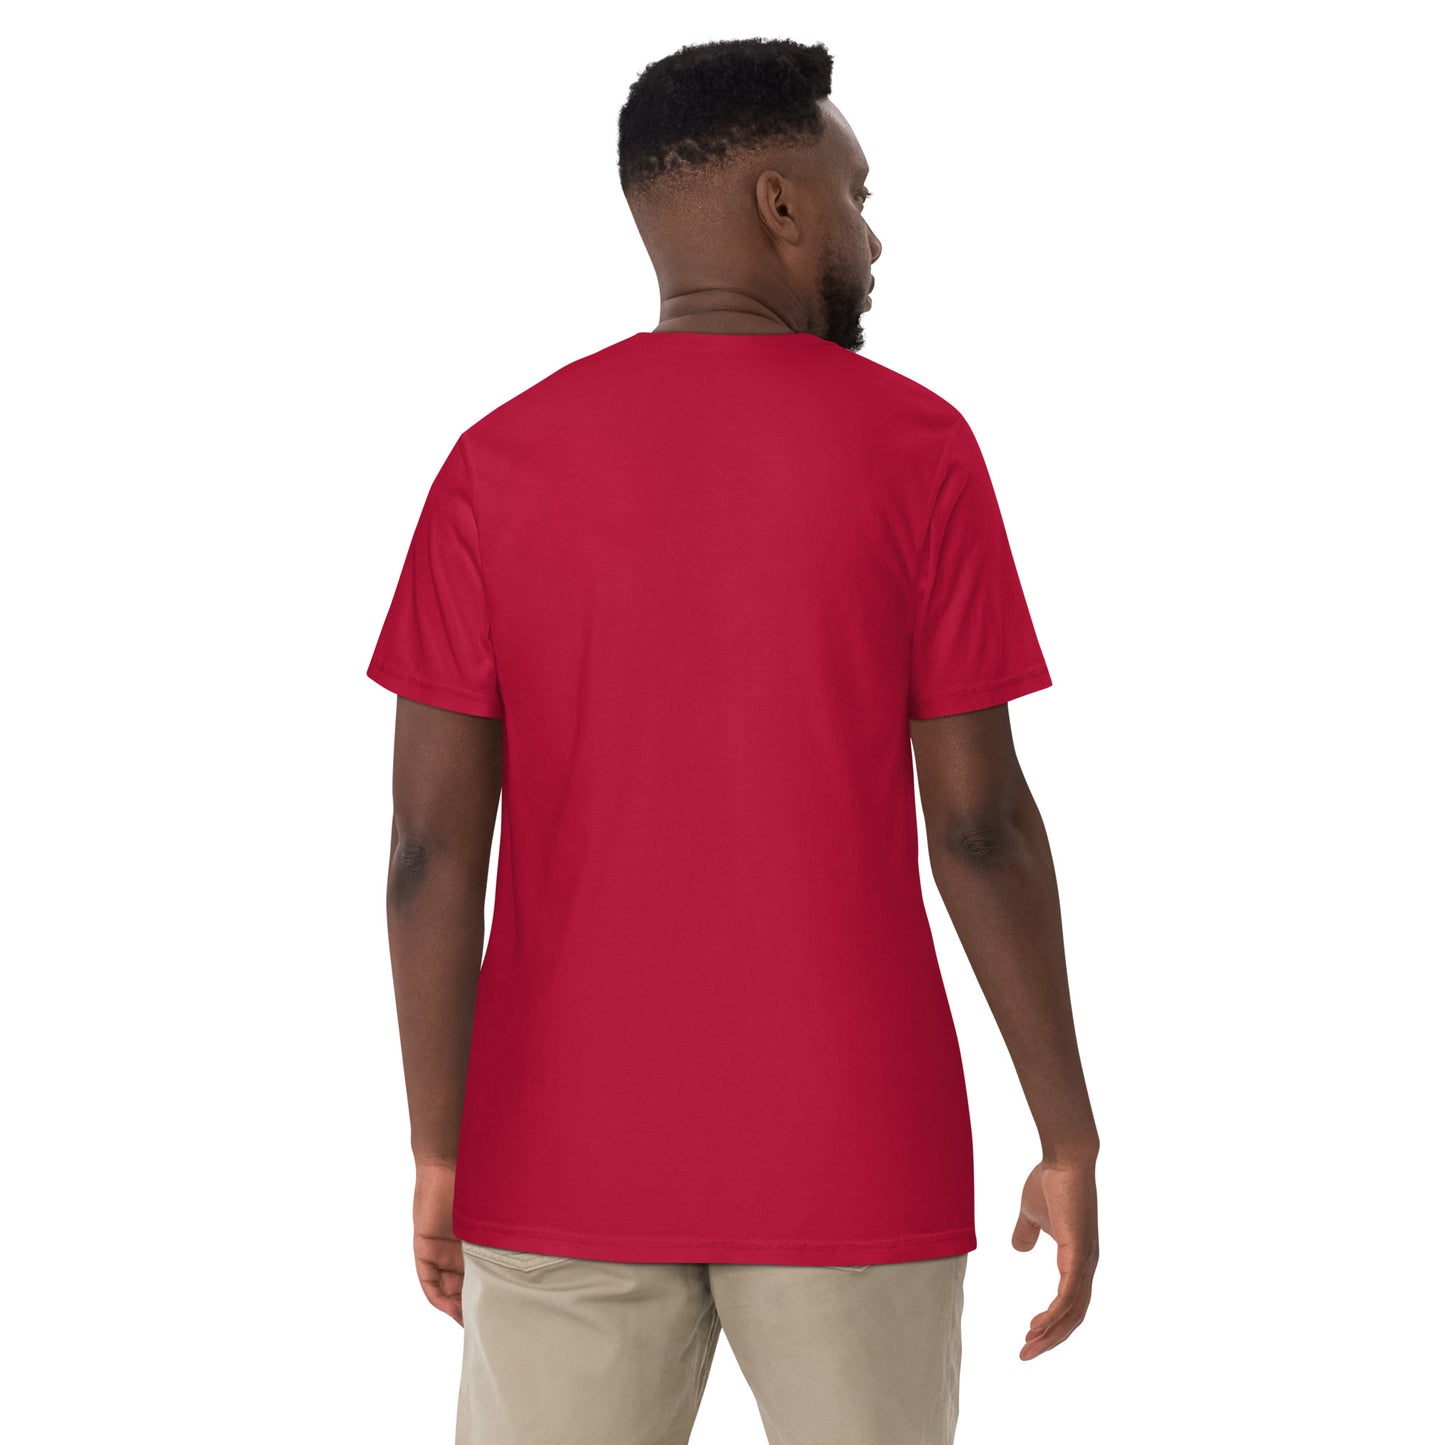 man showing back of a red t shirt